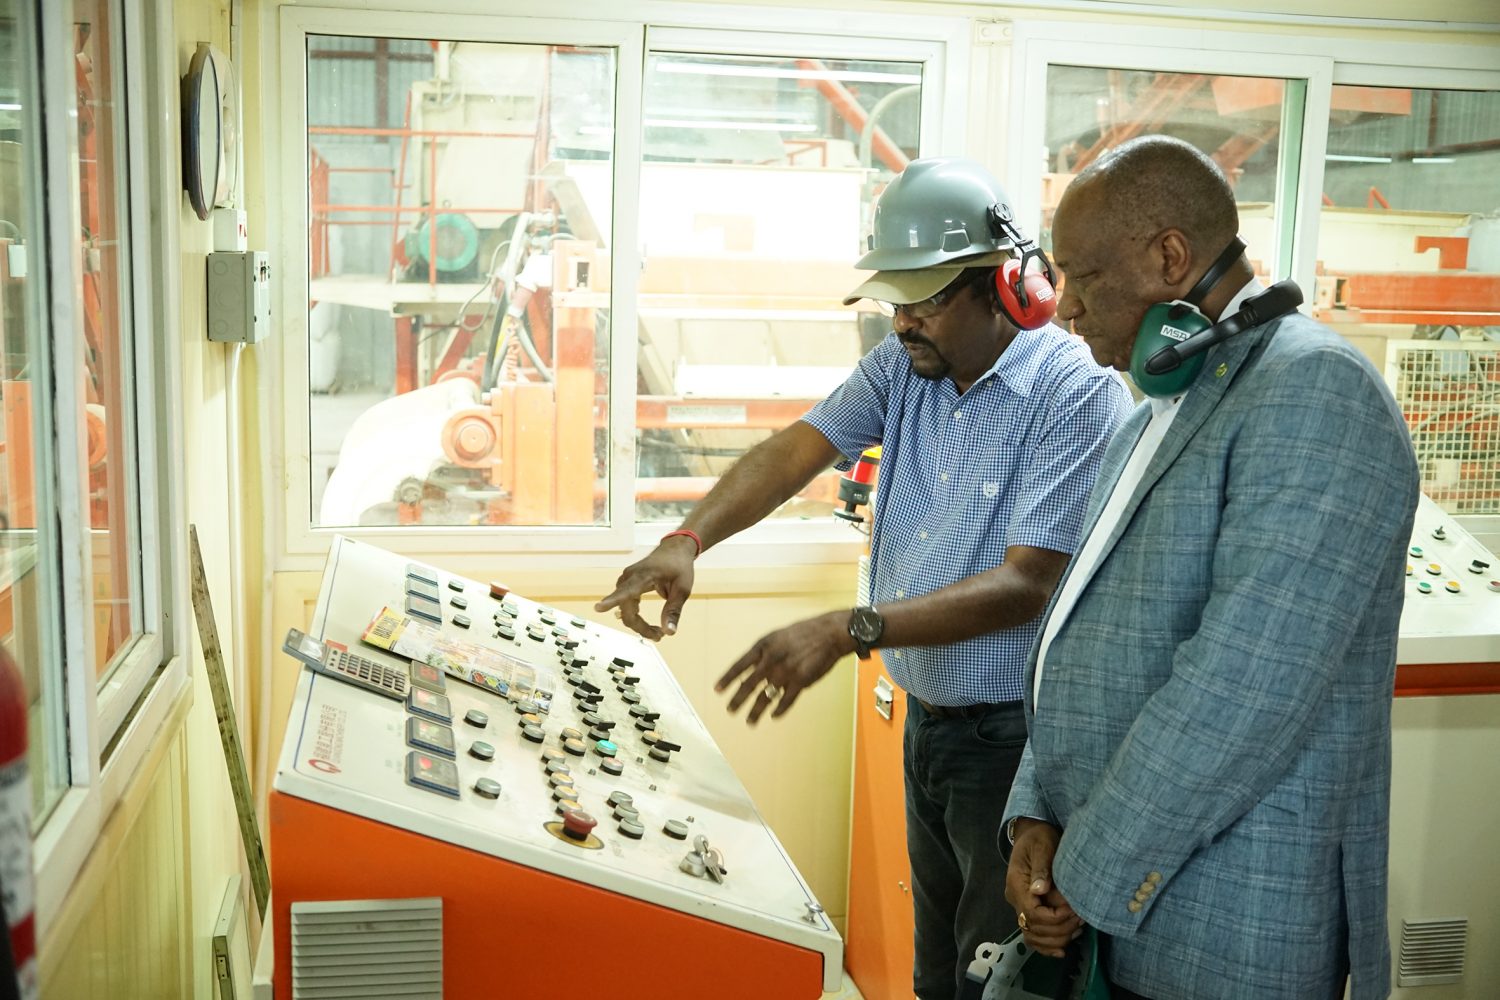 Minister of State Joseph Harmon (right) and KSM CEO Mahadeo Panchu in the control room (Ministry of the Presidency photo)